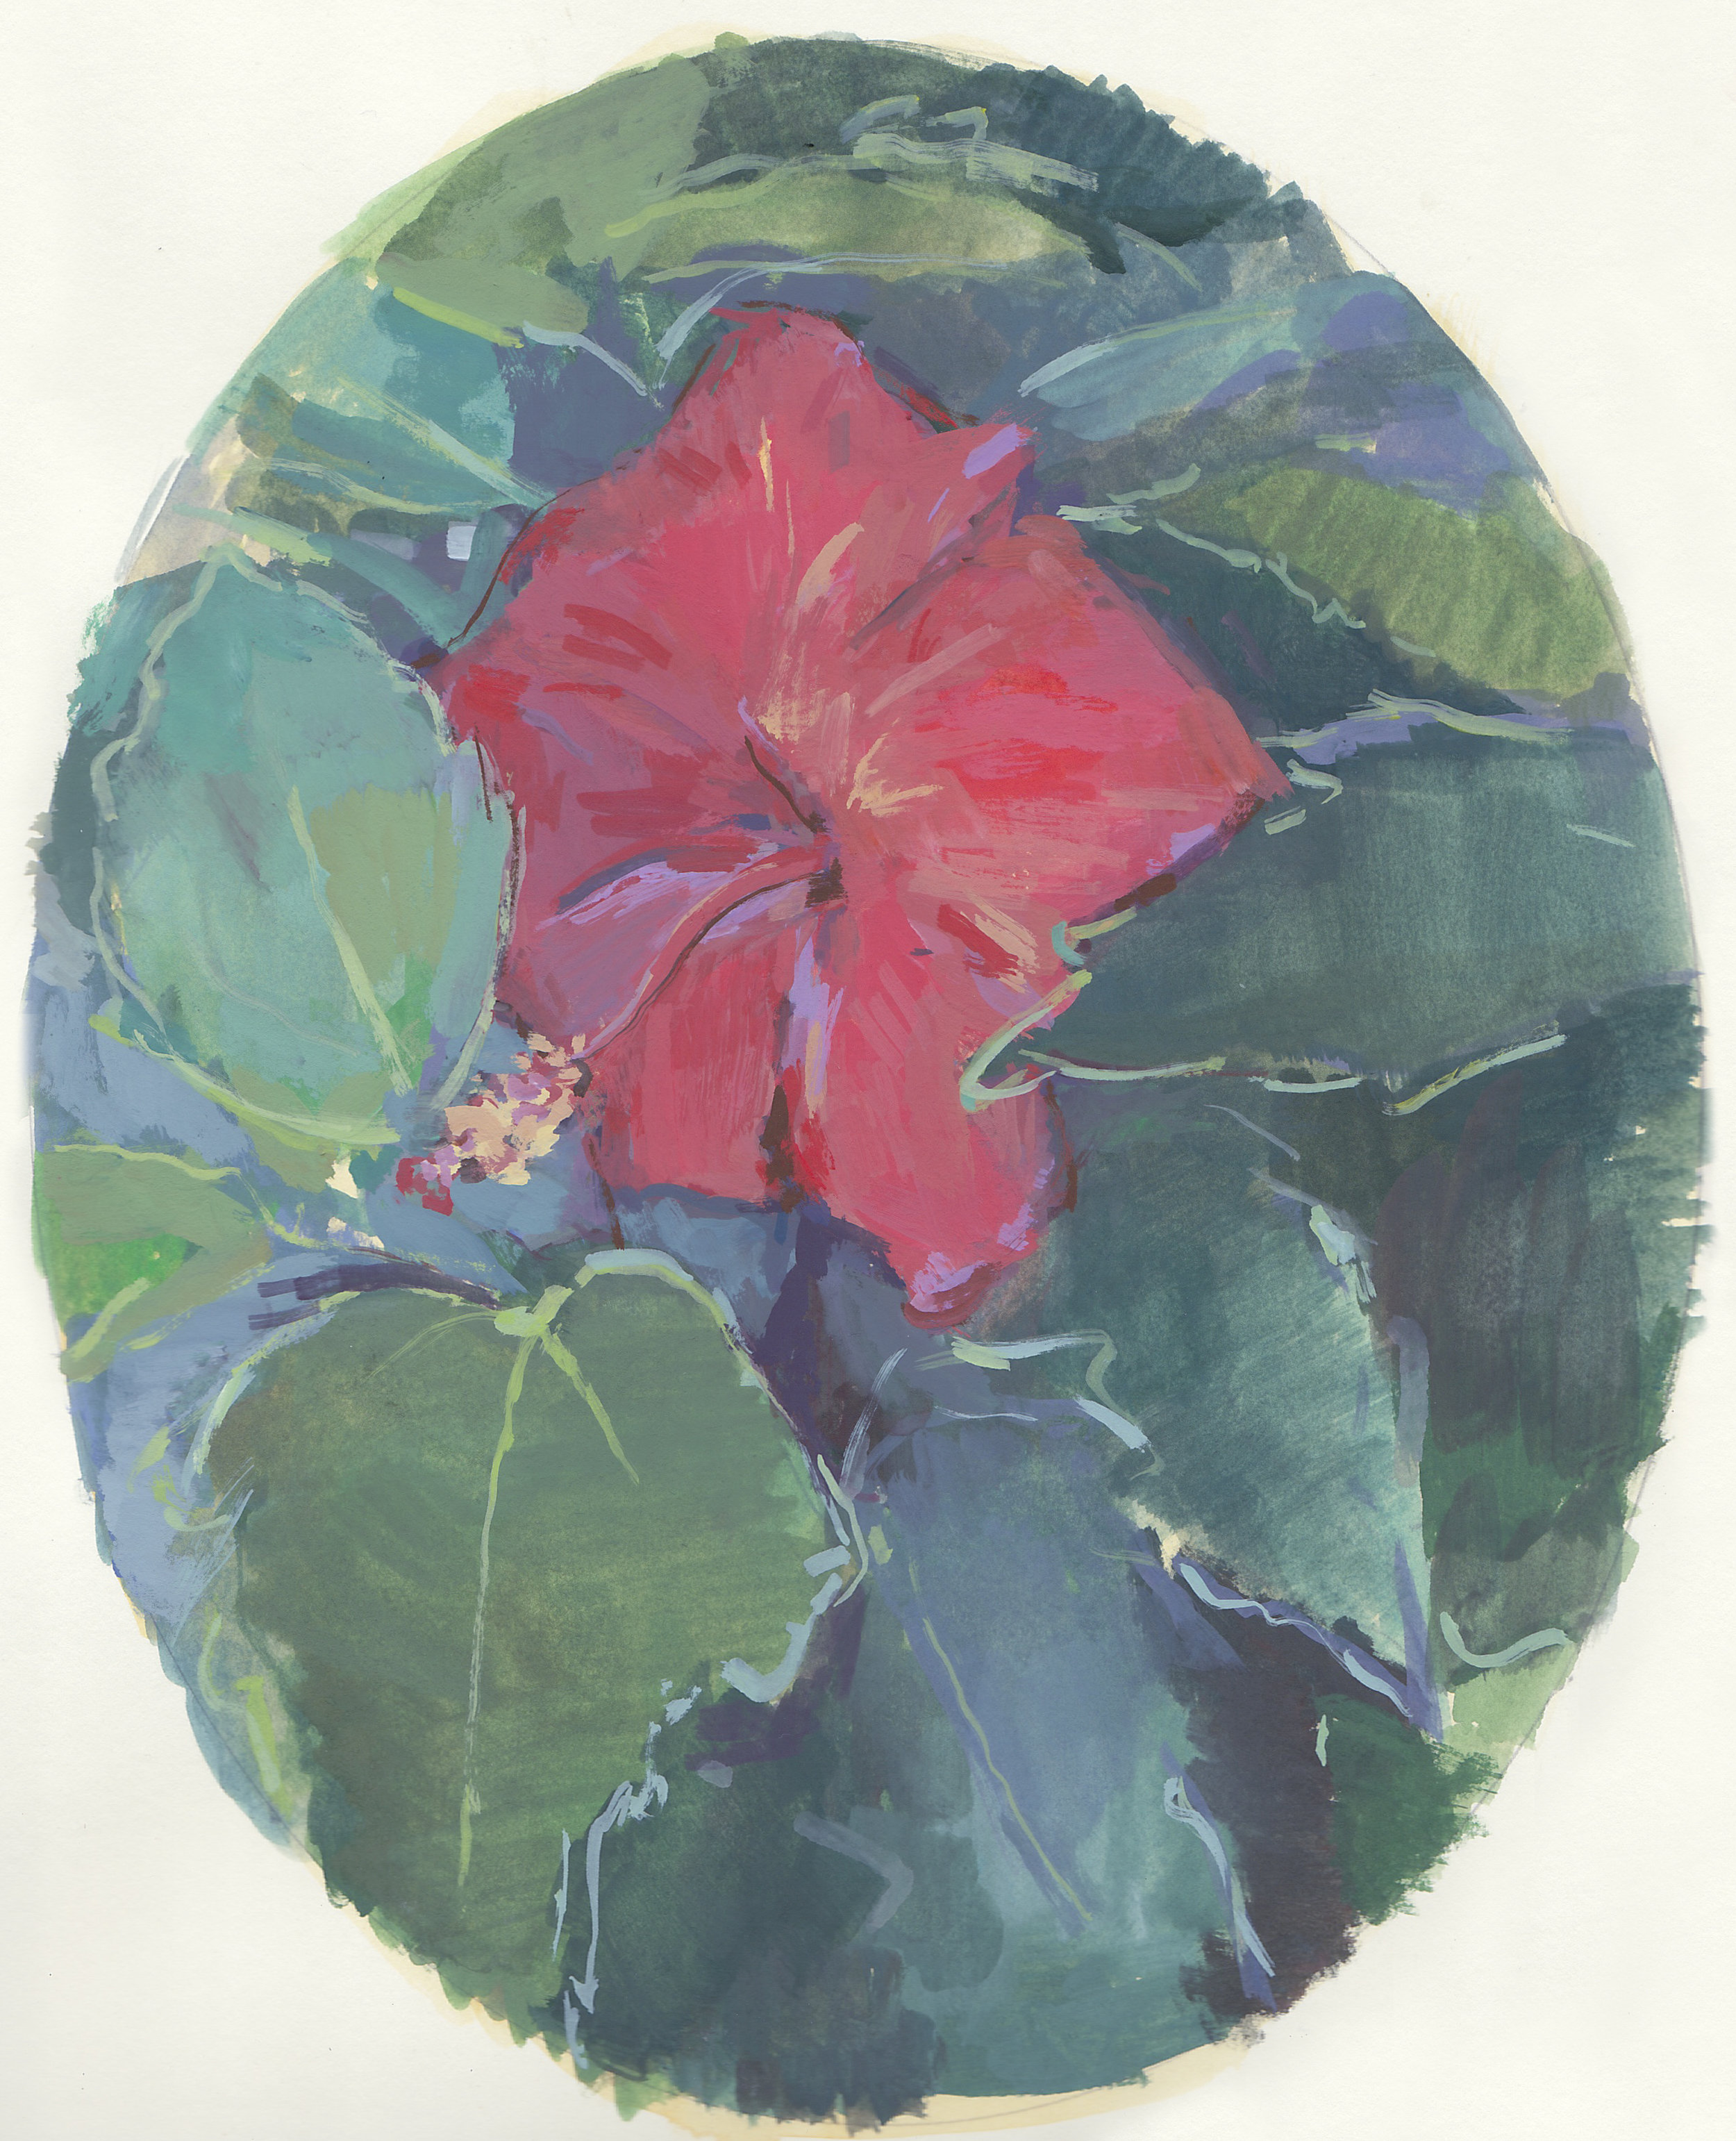    tropical hibiscus     gouache on paper 8x10" 2017  private collection New Jersey 